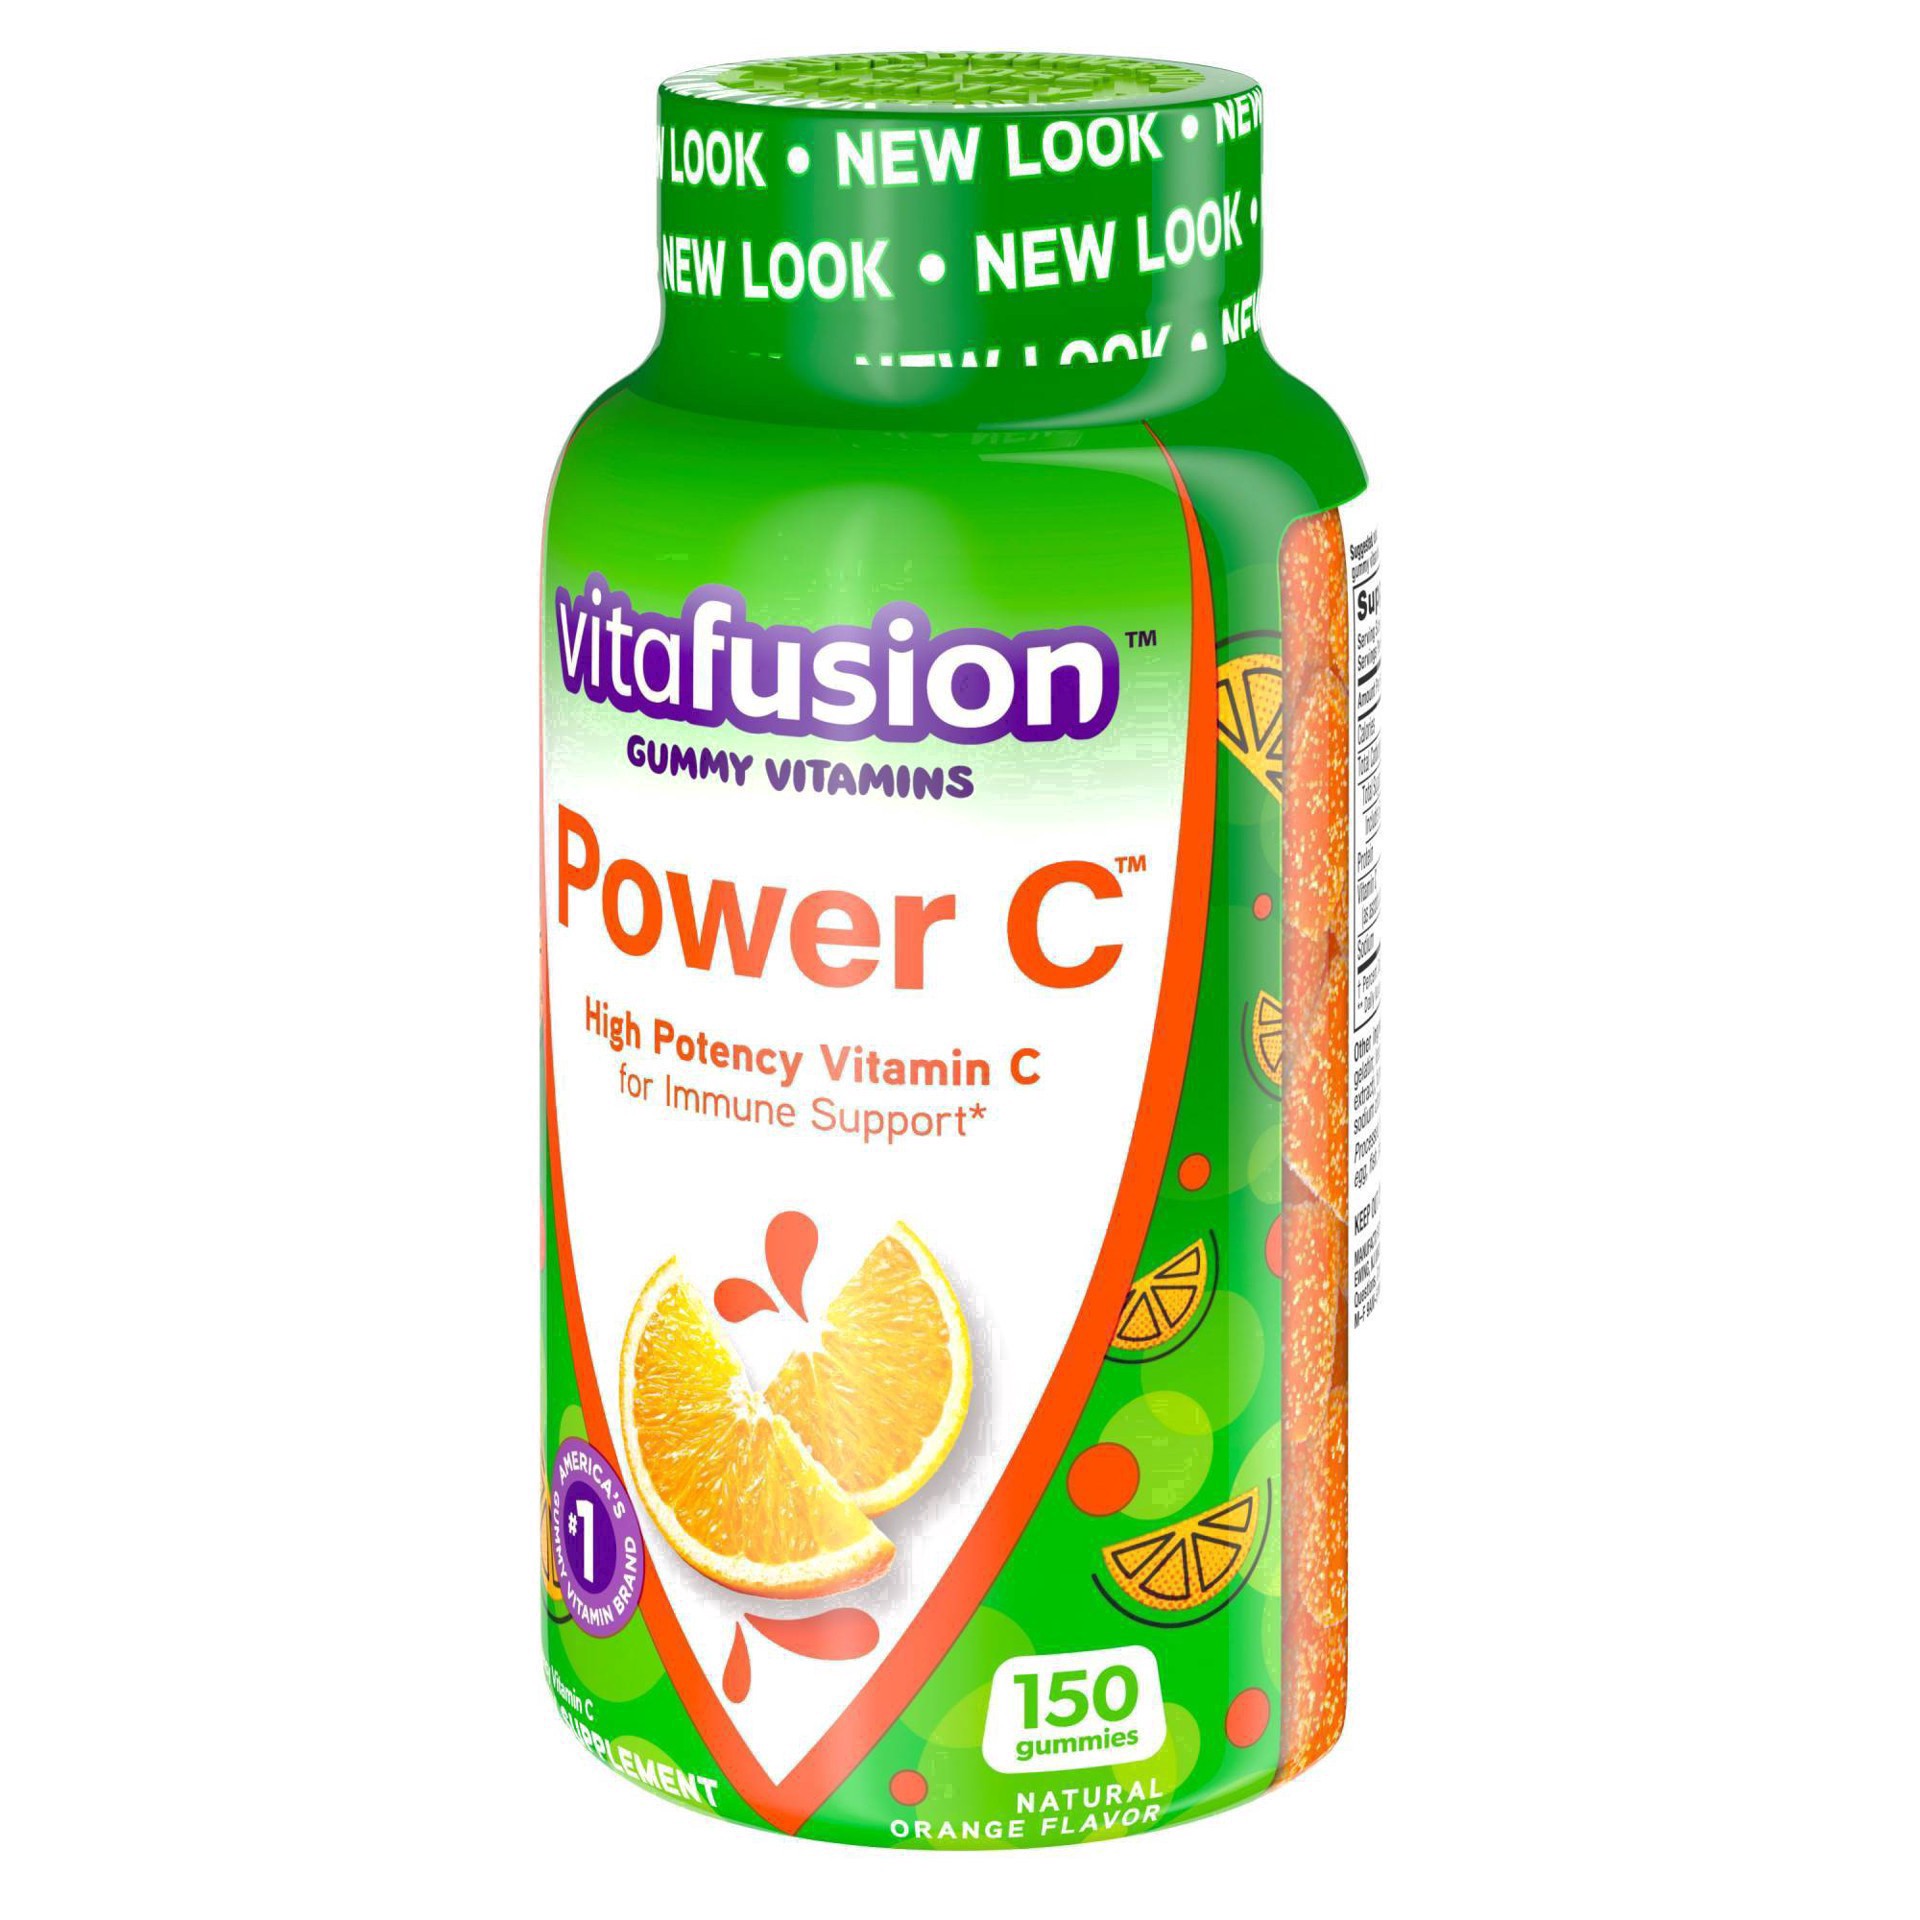 slide 13 of 78, vitafusion Power C Gummy Immune Support* with vitamin C, Delicious Orange Flavor, 150ct (50 day supply), from America's Number One Gummy Vitamin Brand, 150 cnt